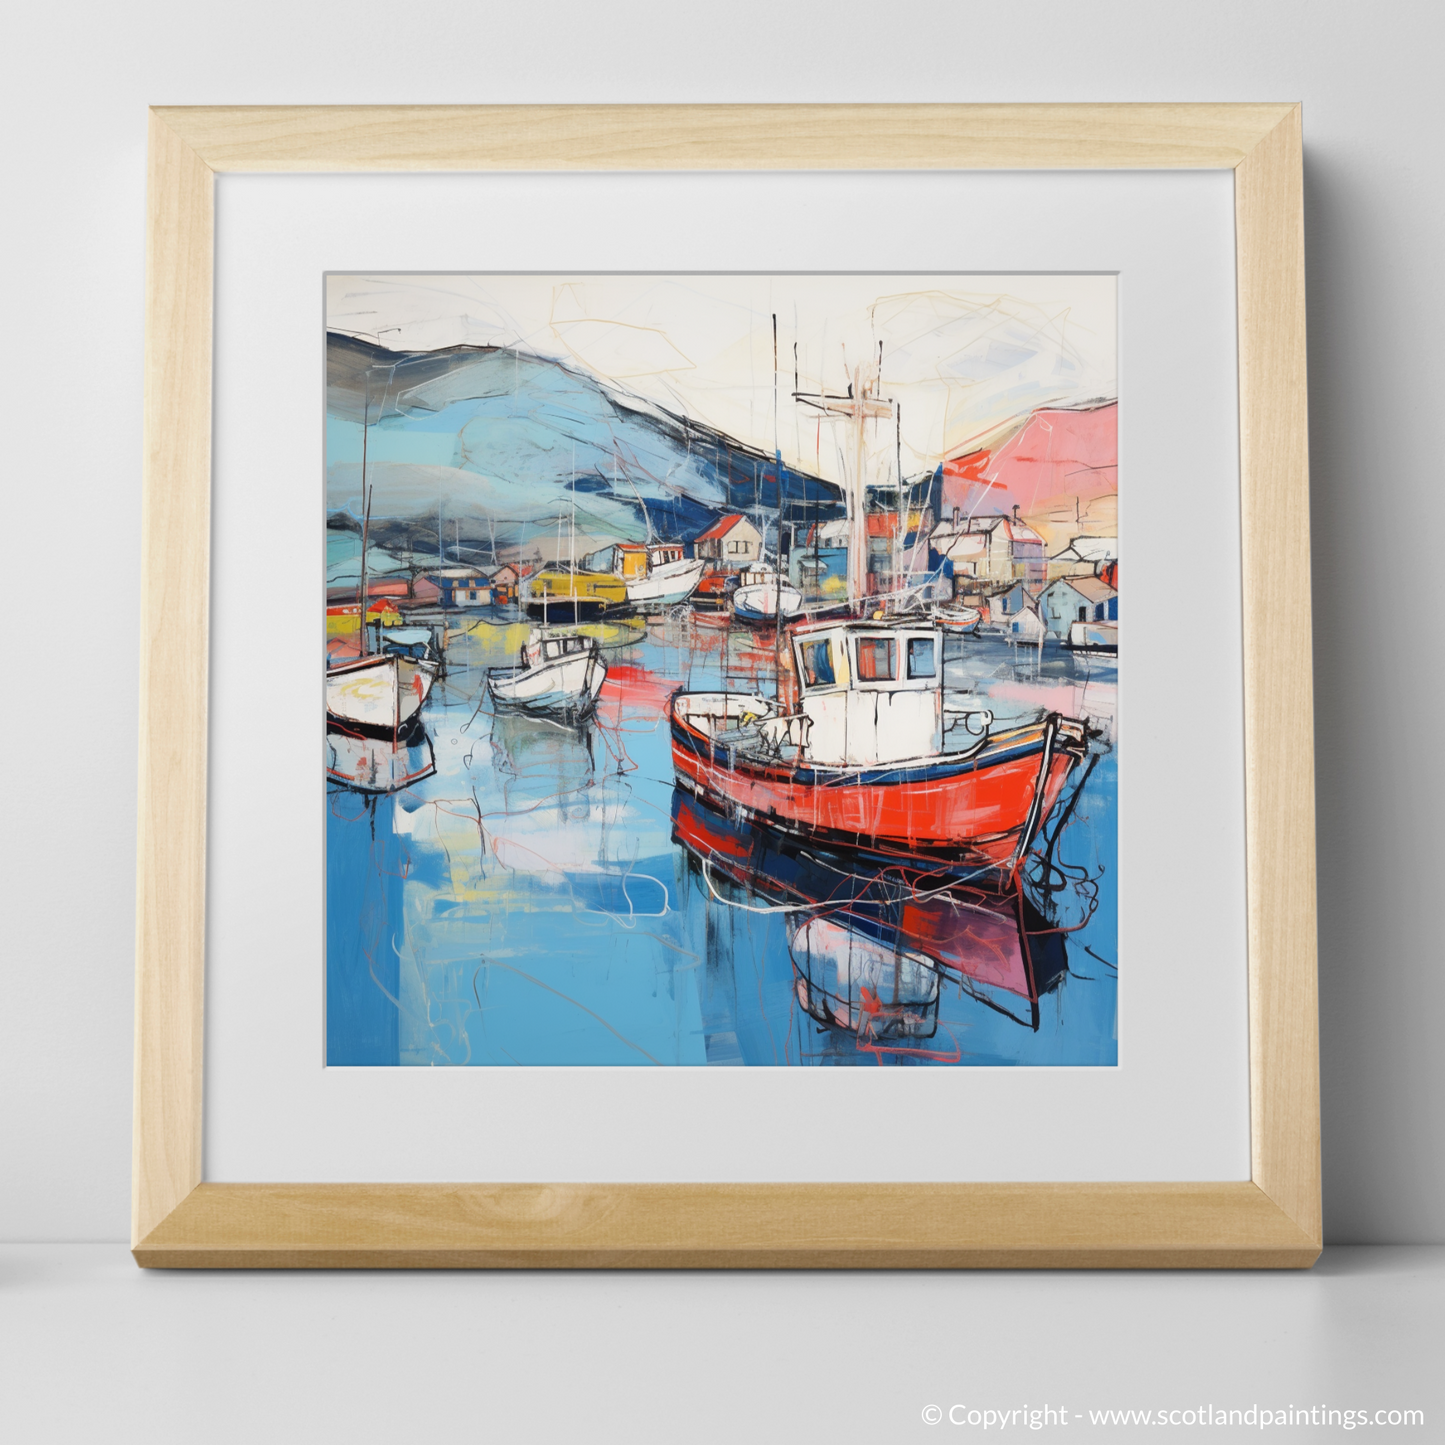 Art Print of Ullapool Harbour with a natural frame